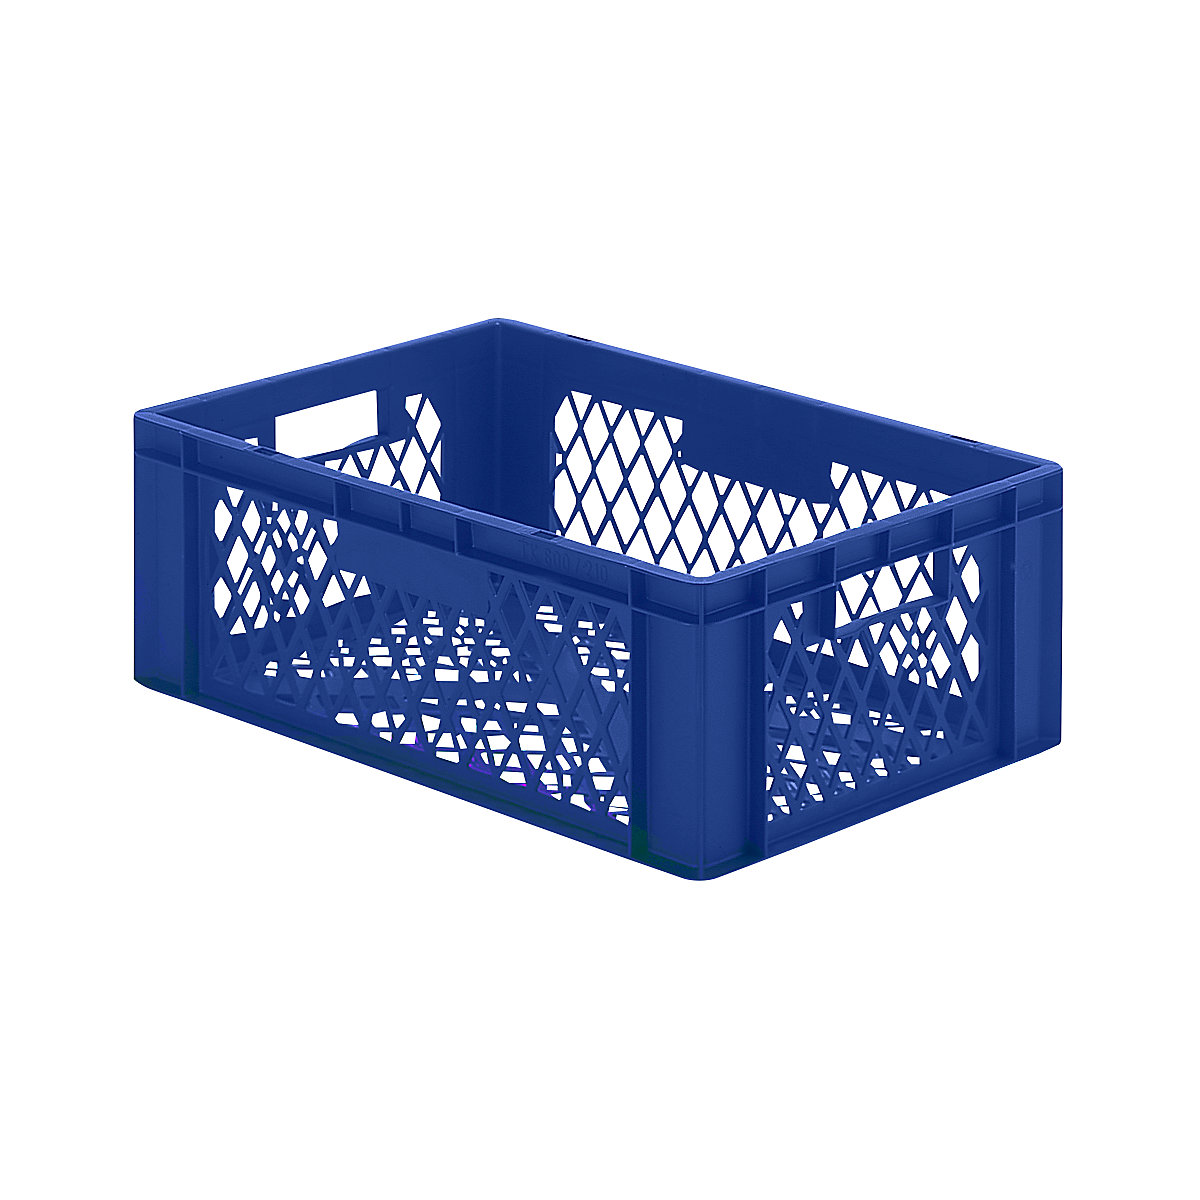 Euro stacking container, perforated walls and base, LxWxH 600 x 400 x 210 mm, blue, pack of 5